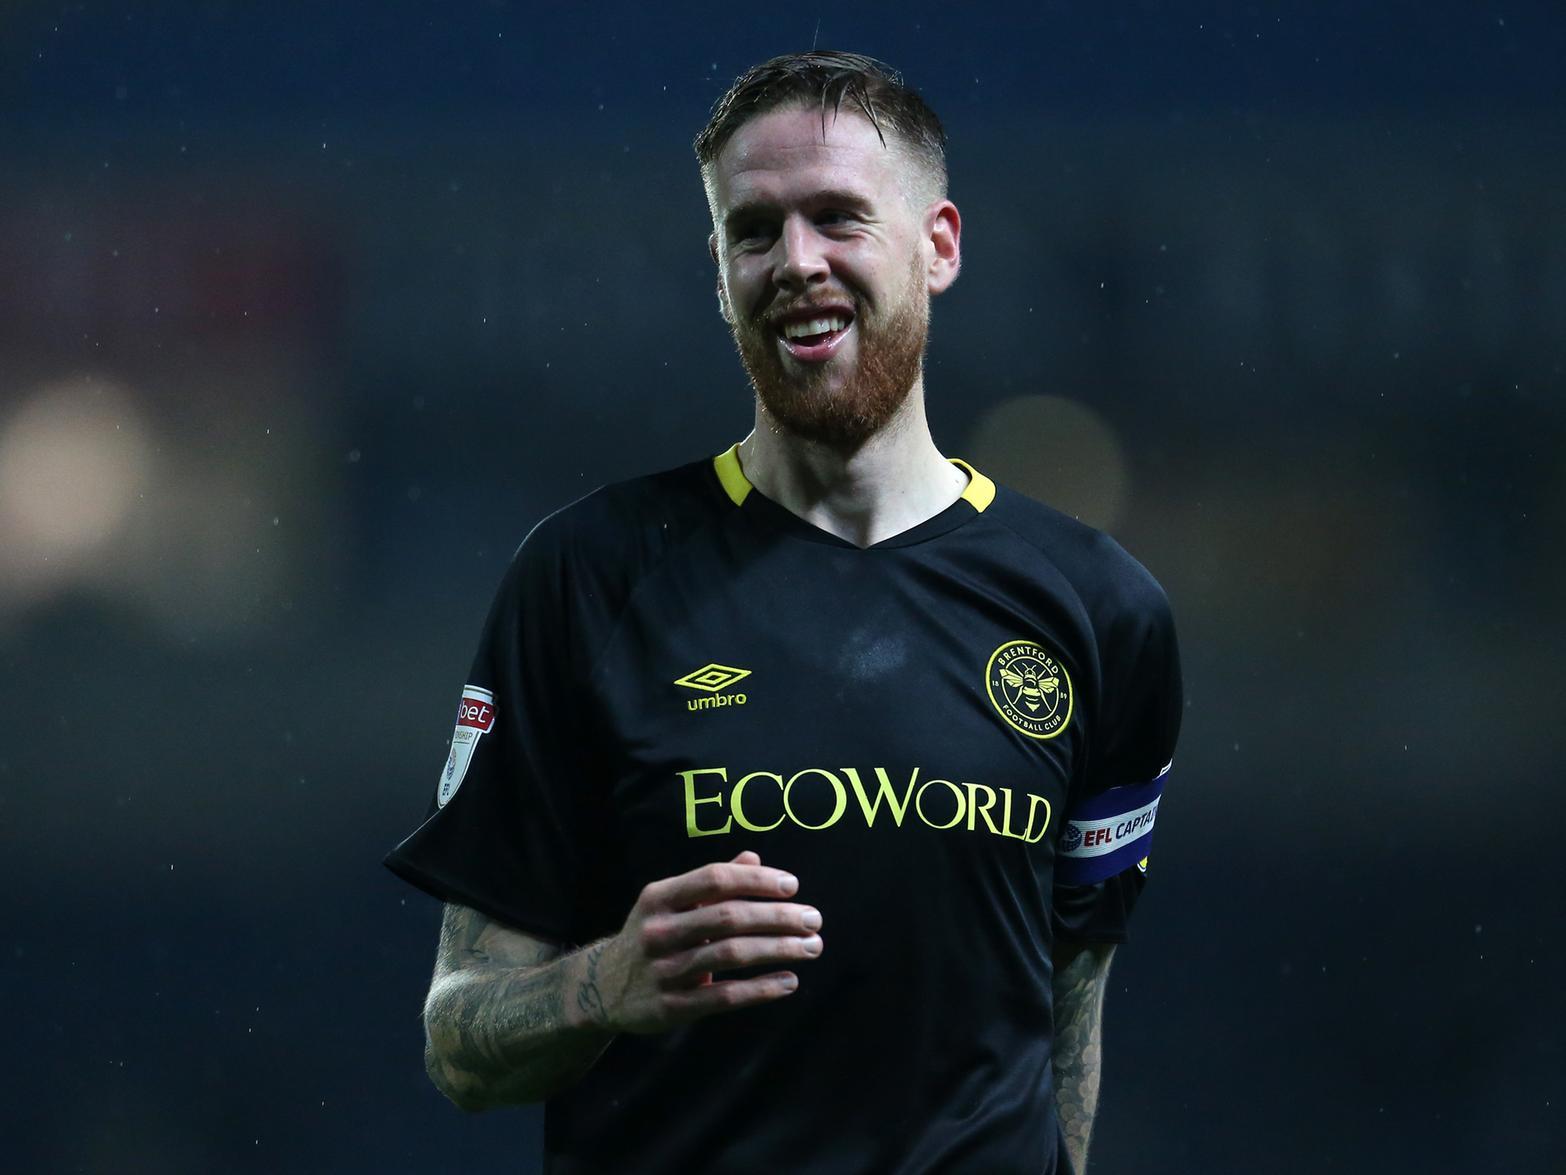 Ex-Leeds United defender Pontus Jansson has revealed that he would be delighted if the Whites got promoted this season, alongside his new club Brentford. (Guardian)